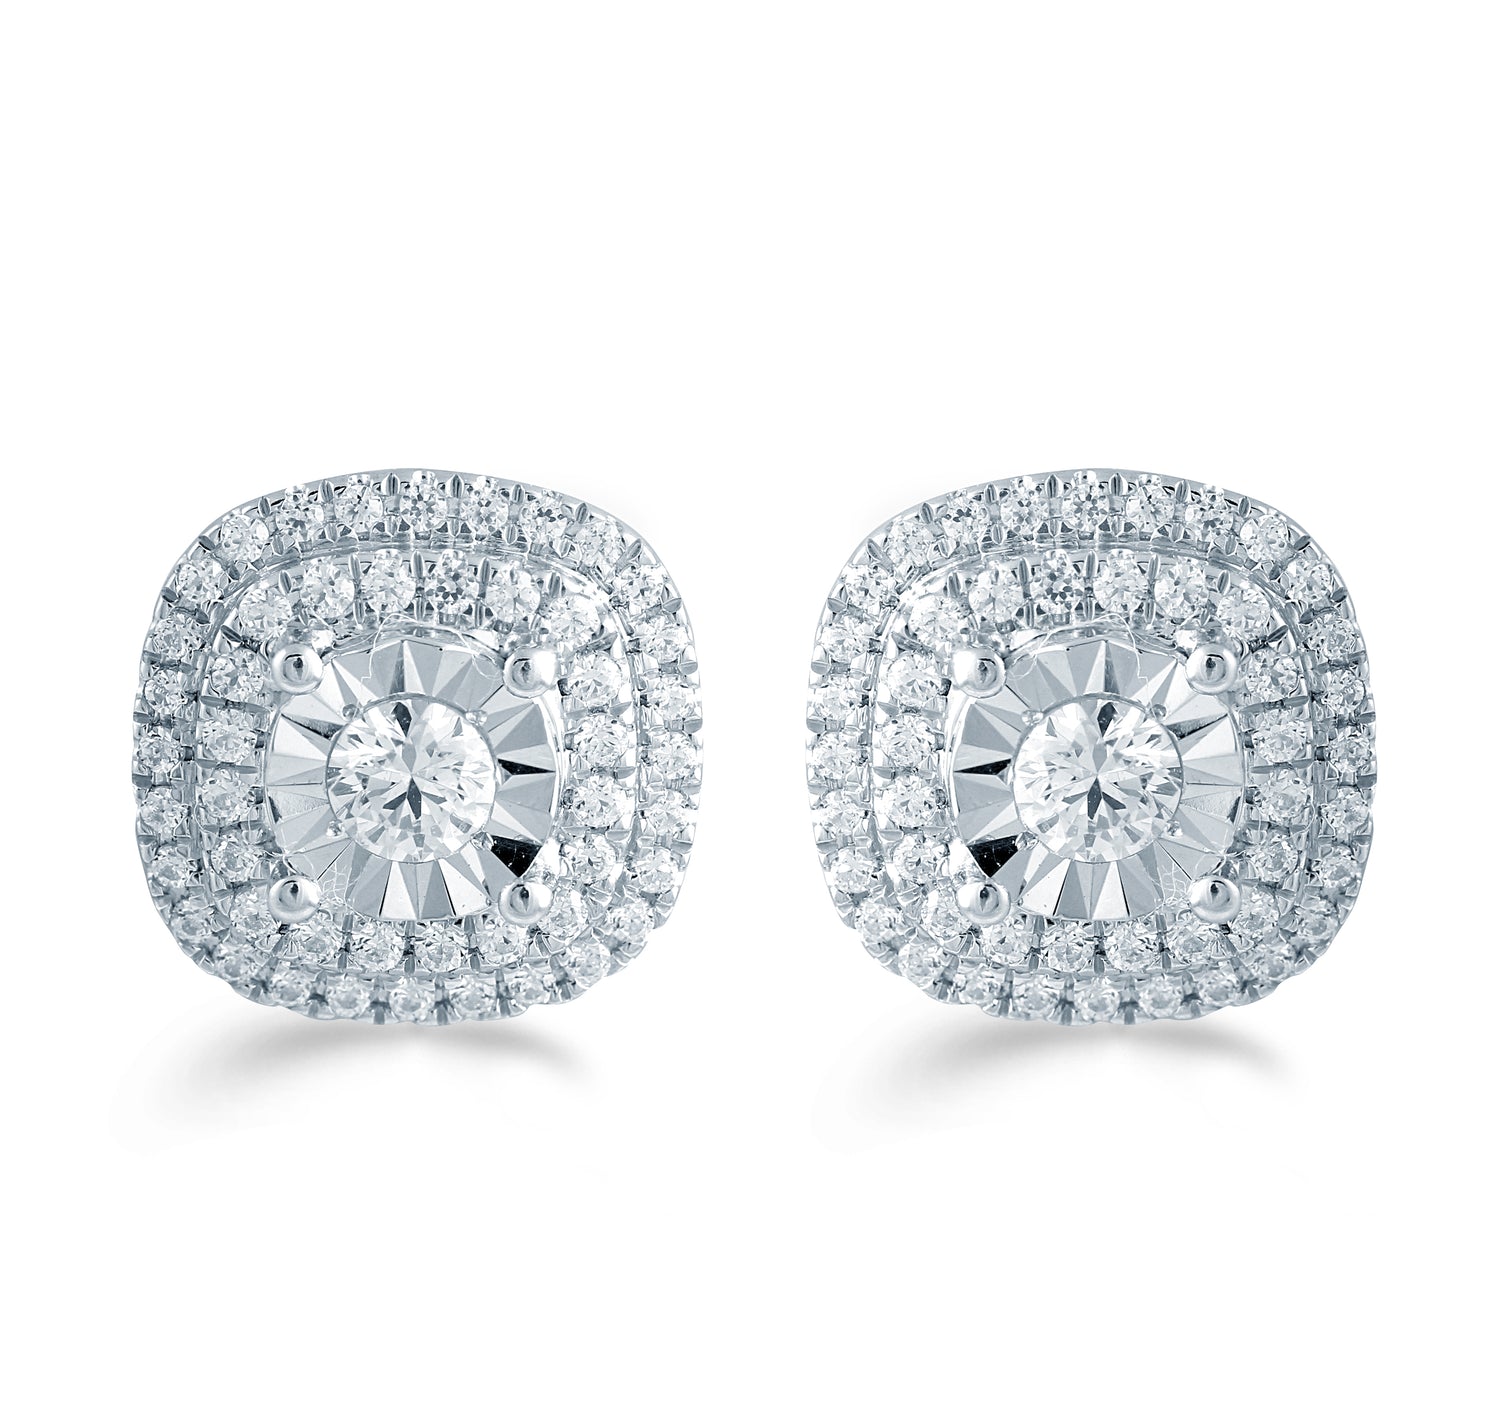 Set of 2 : 3/4CT TW Diamond Cushion Cluster Pendant & Earrings in Sterling Silver